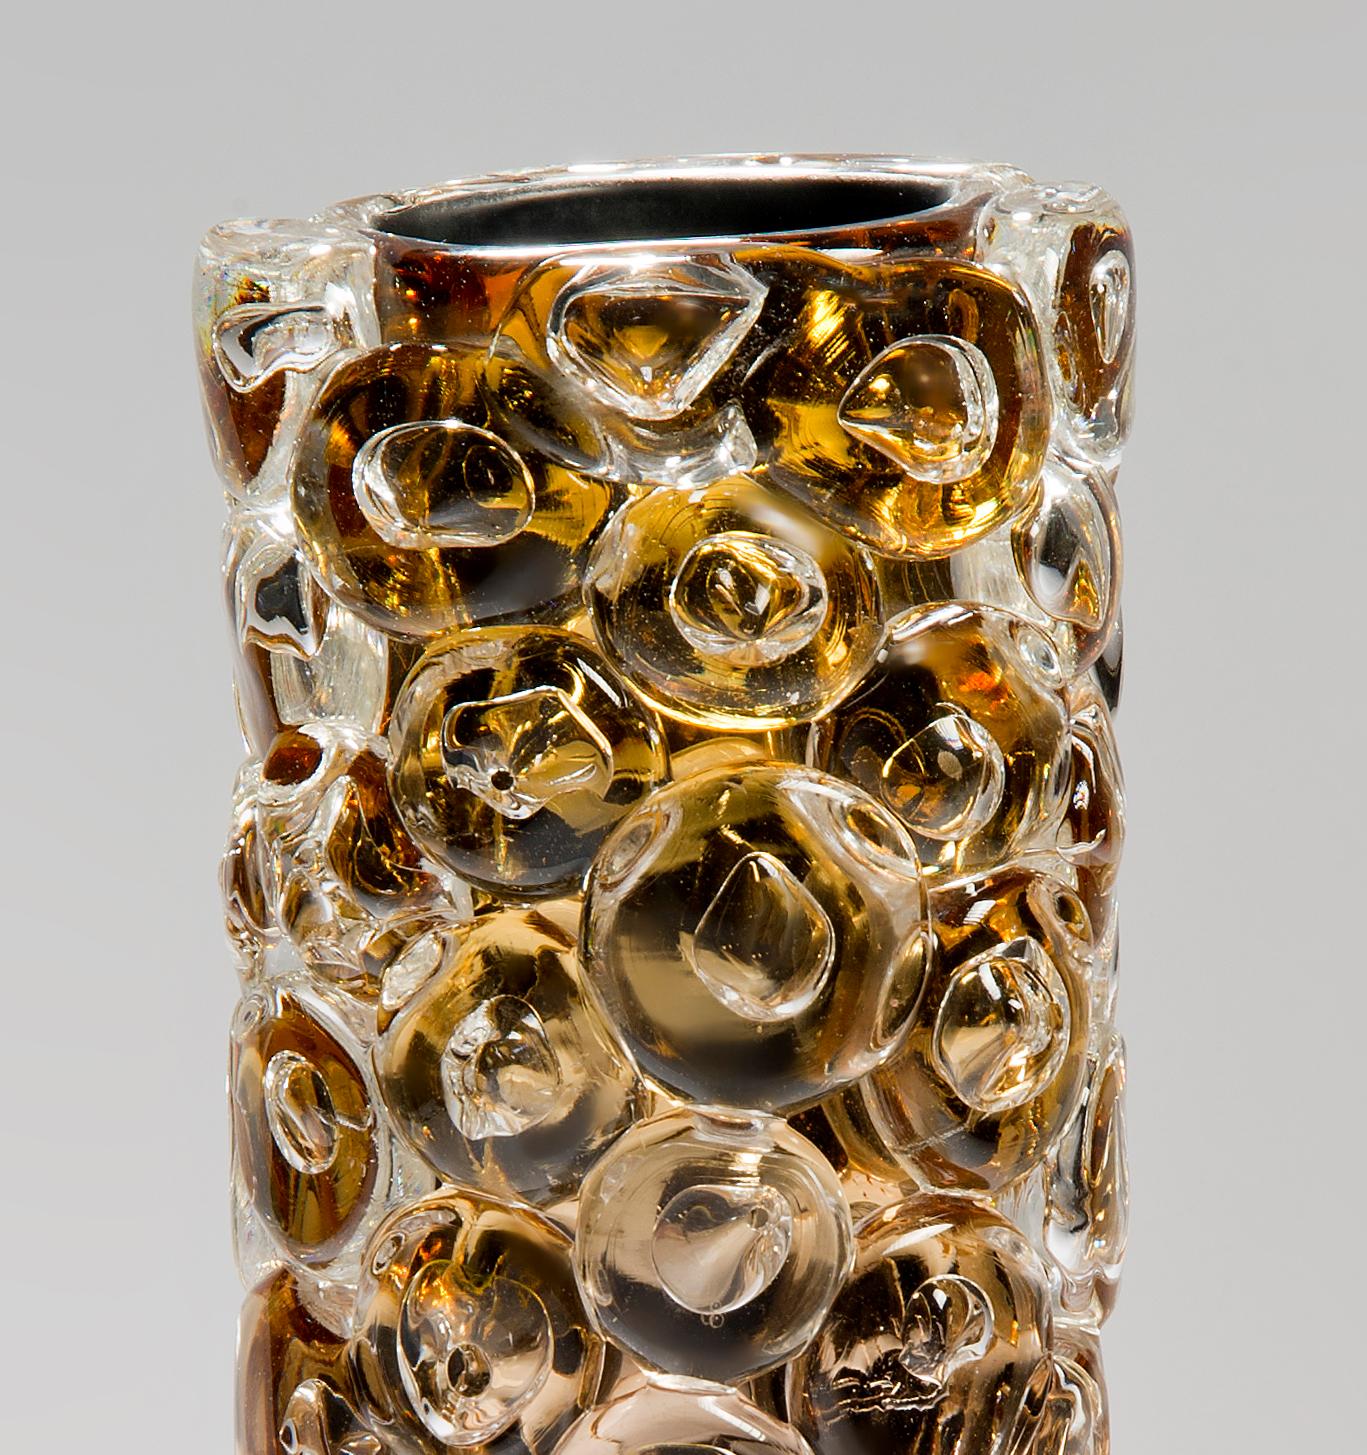 Bubblewrap in Gold, a Unique pink, gold & silver glass Vase by Allister Malcolm 2